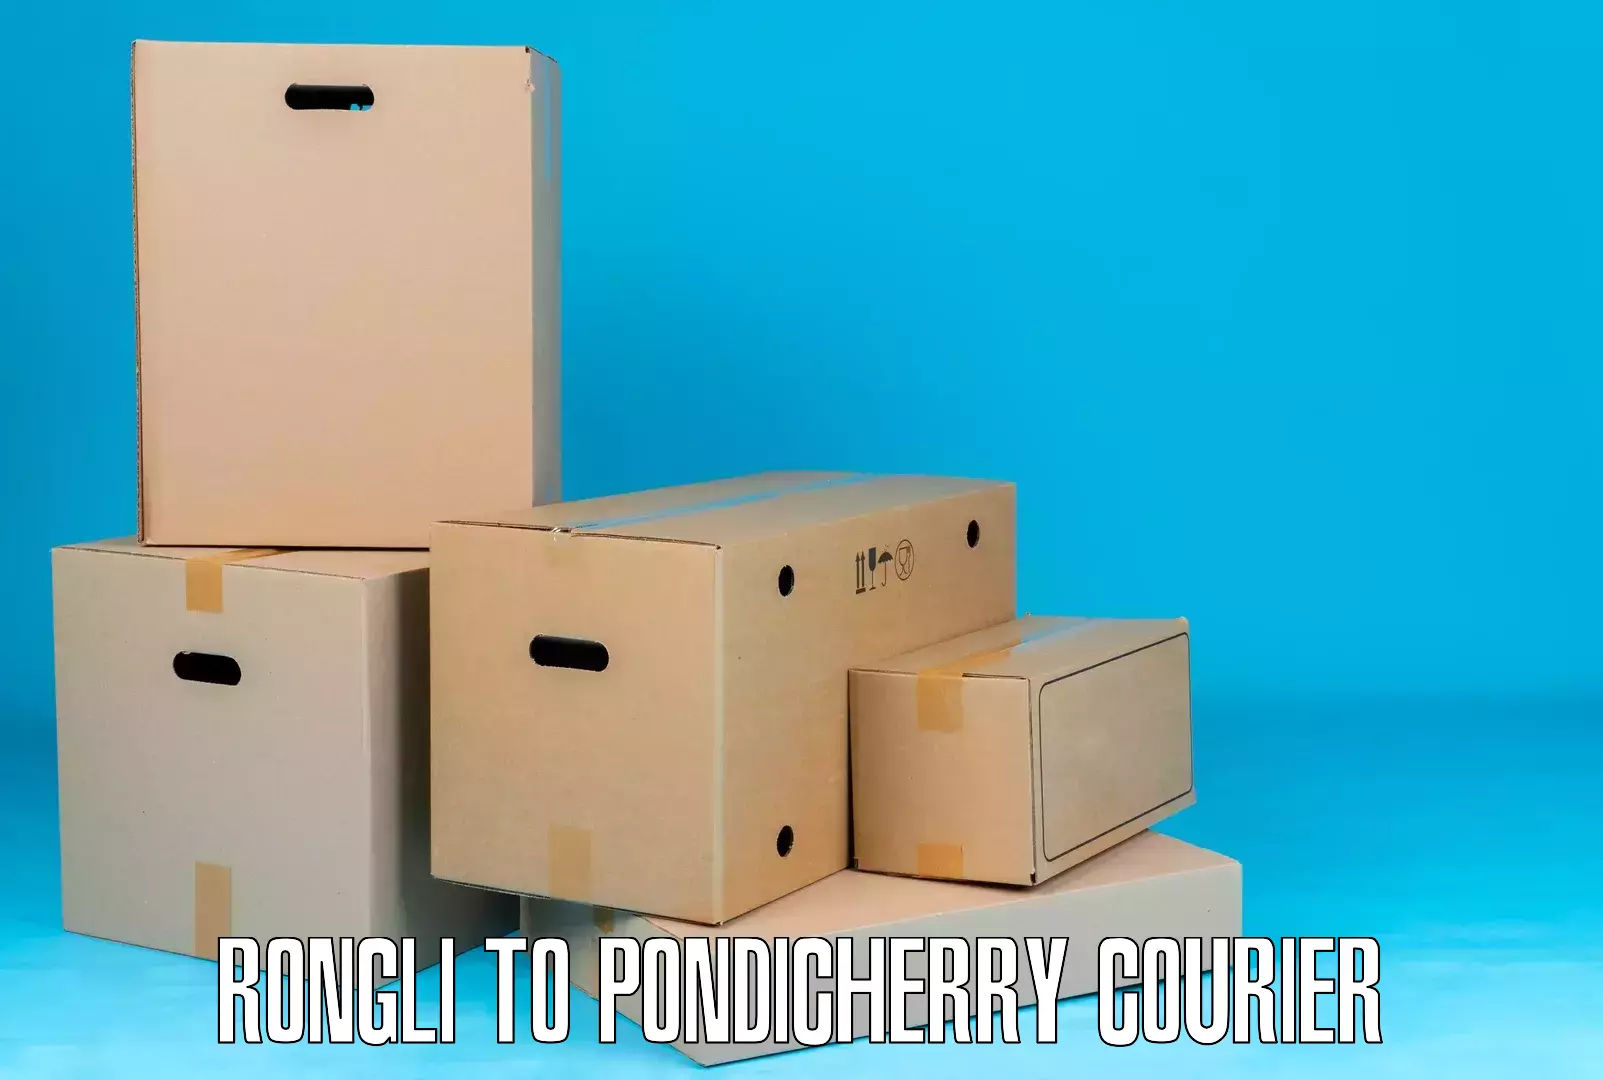 Nationwide courier service Rongli to Pondicherry